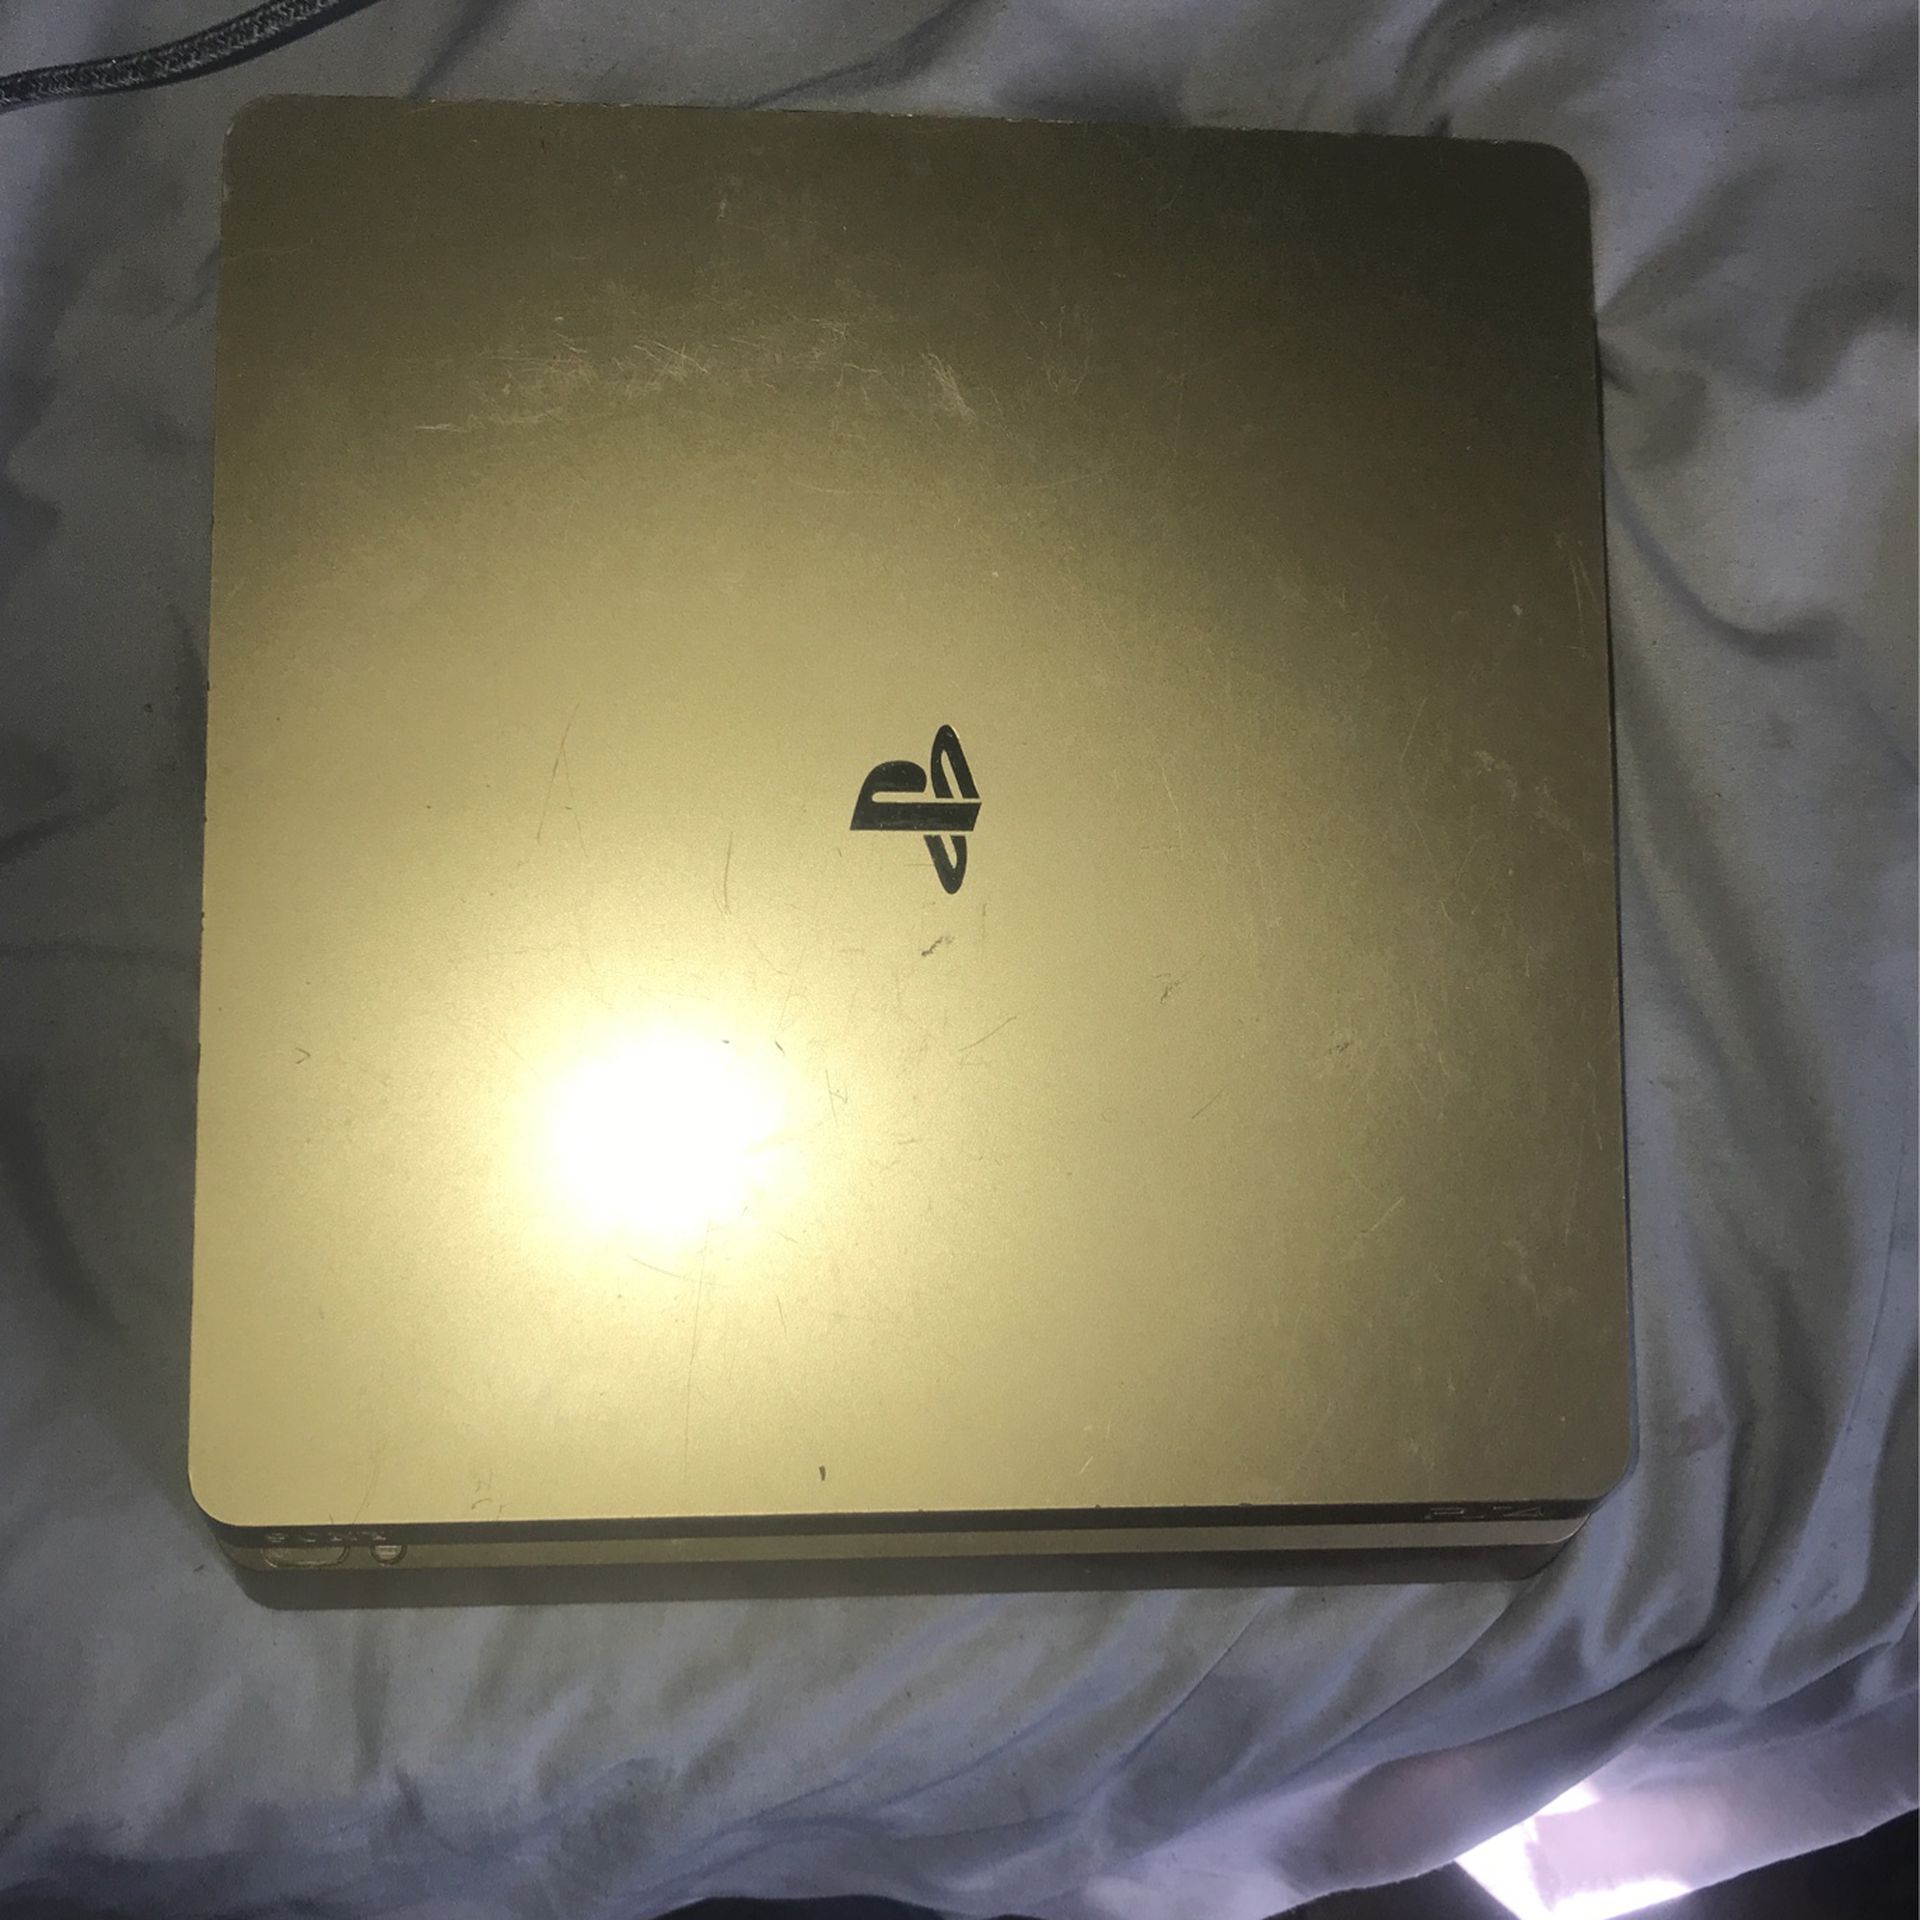 Ps4 For Sale